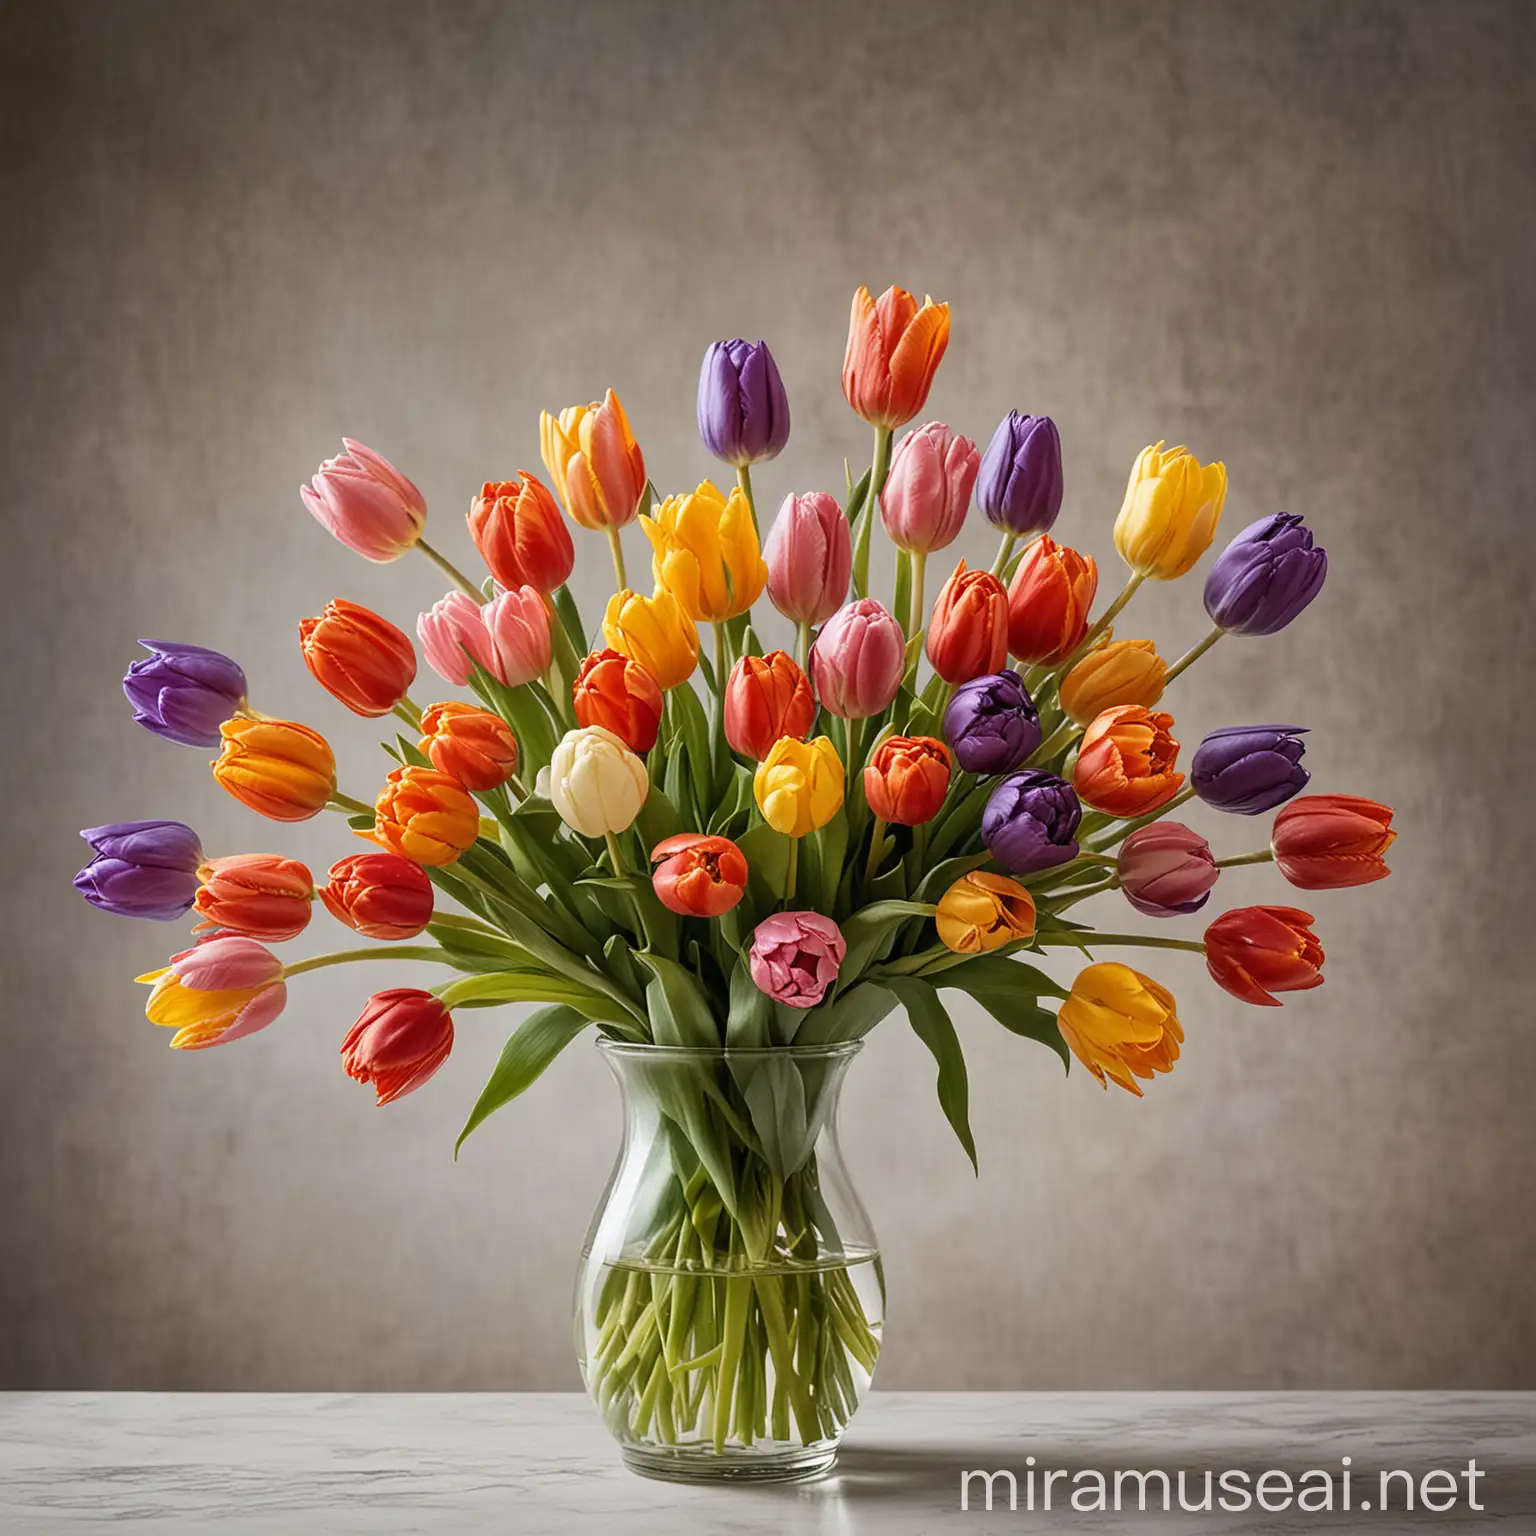 A vase filled with an array of colorful tulips, their petals reaching for the sky.
